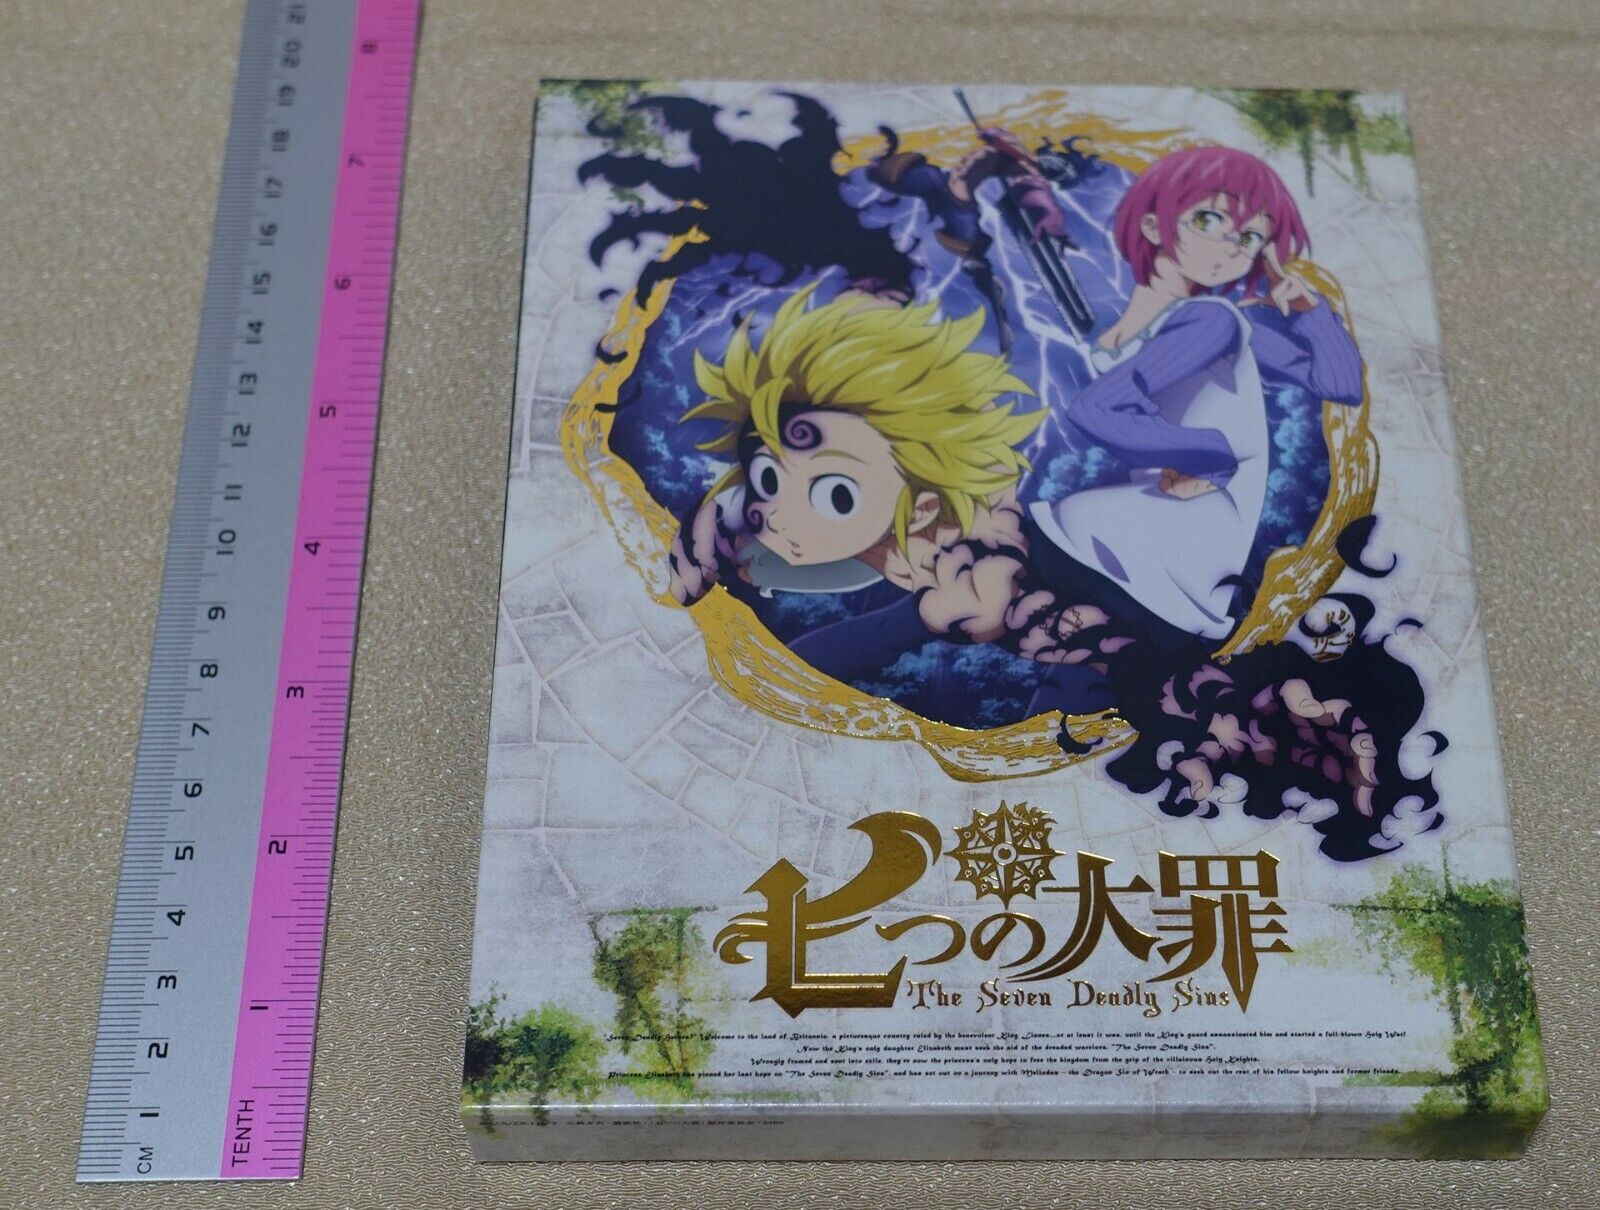 Harem in the Labyrinth of Another World Blu-ray Box Vol.1 & 2